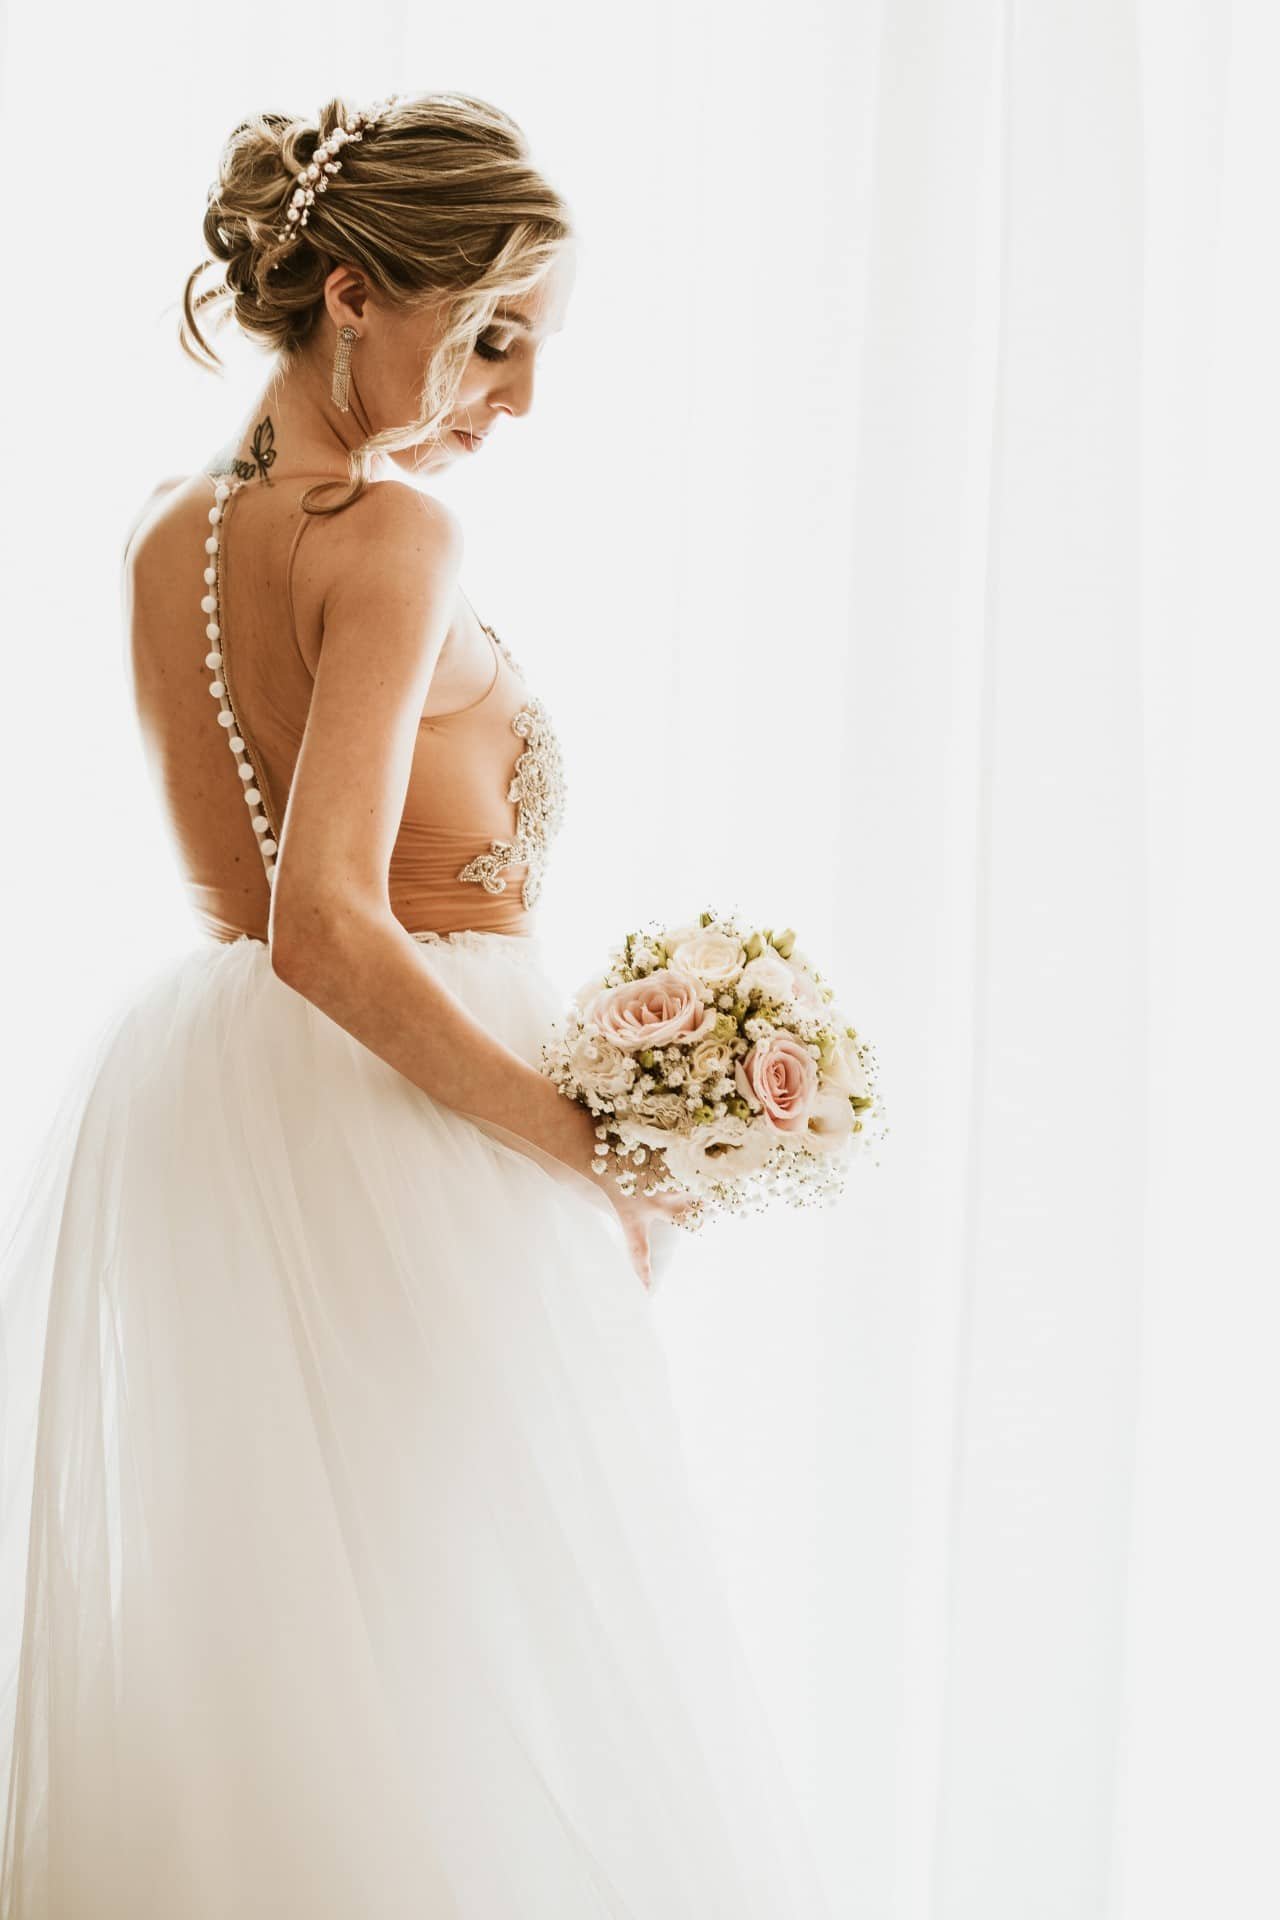 bride in her white dress holding her bouquet of flowers